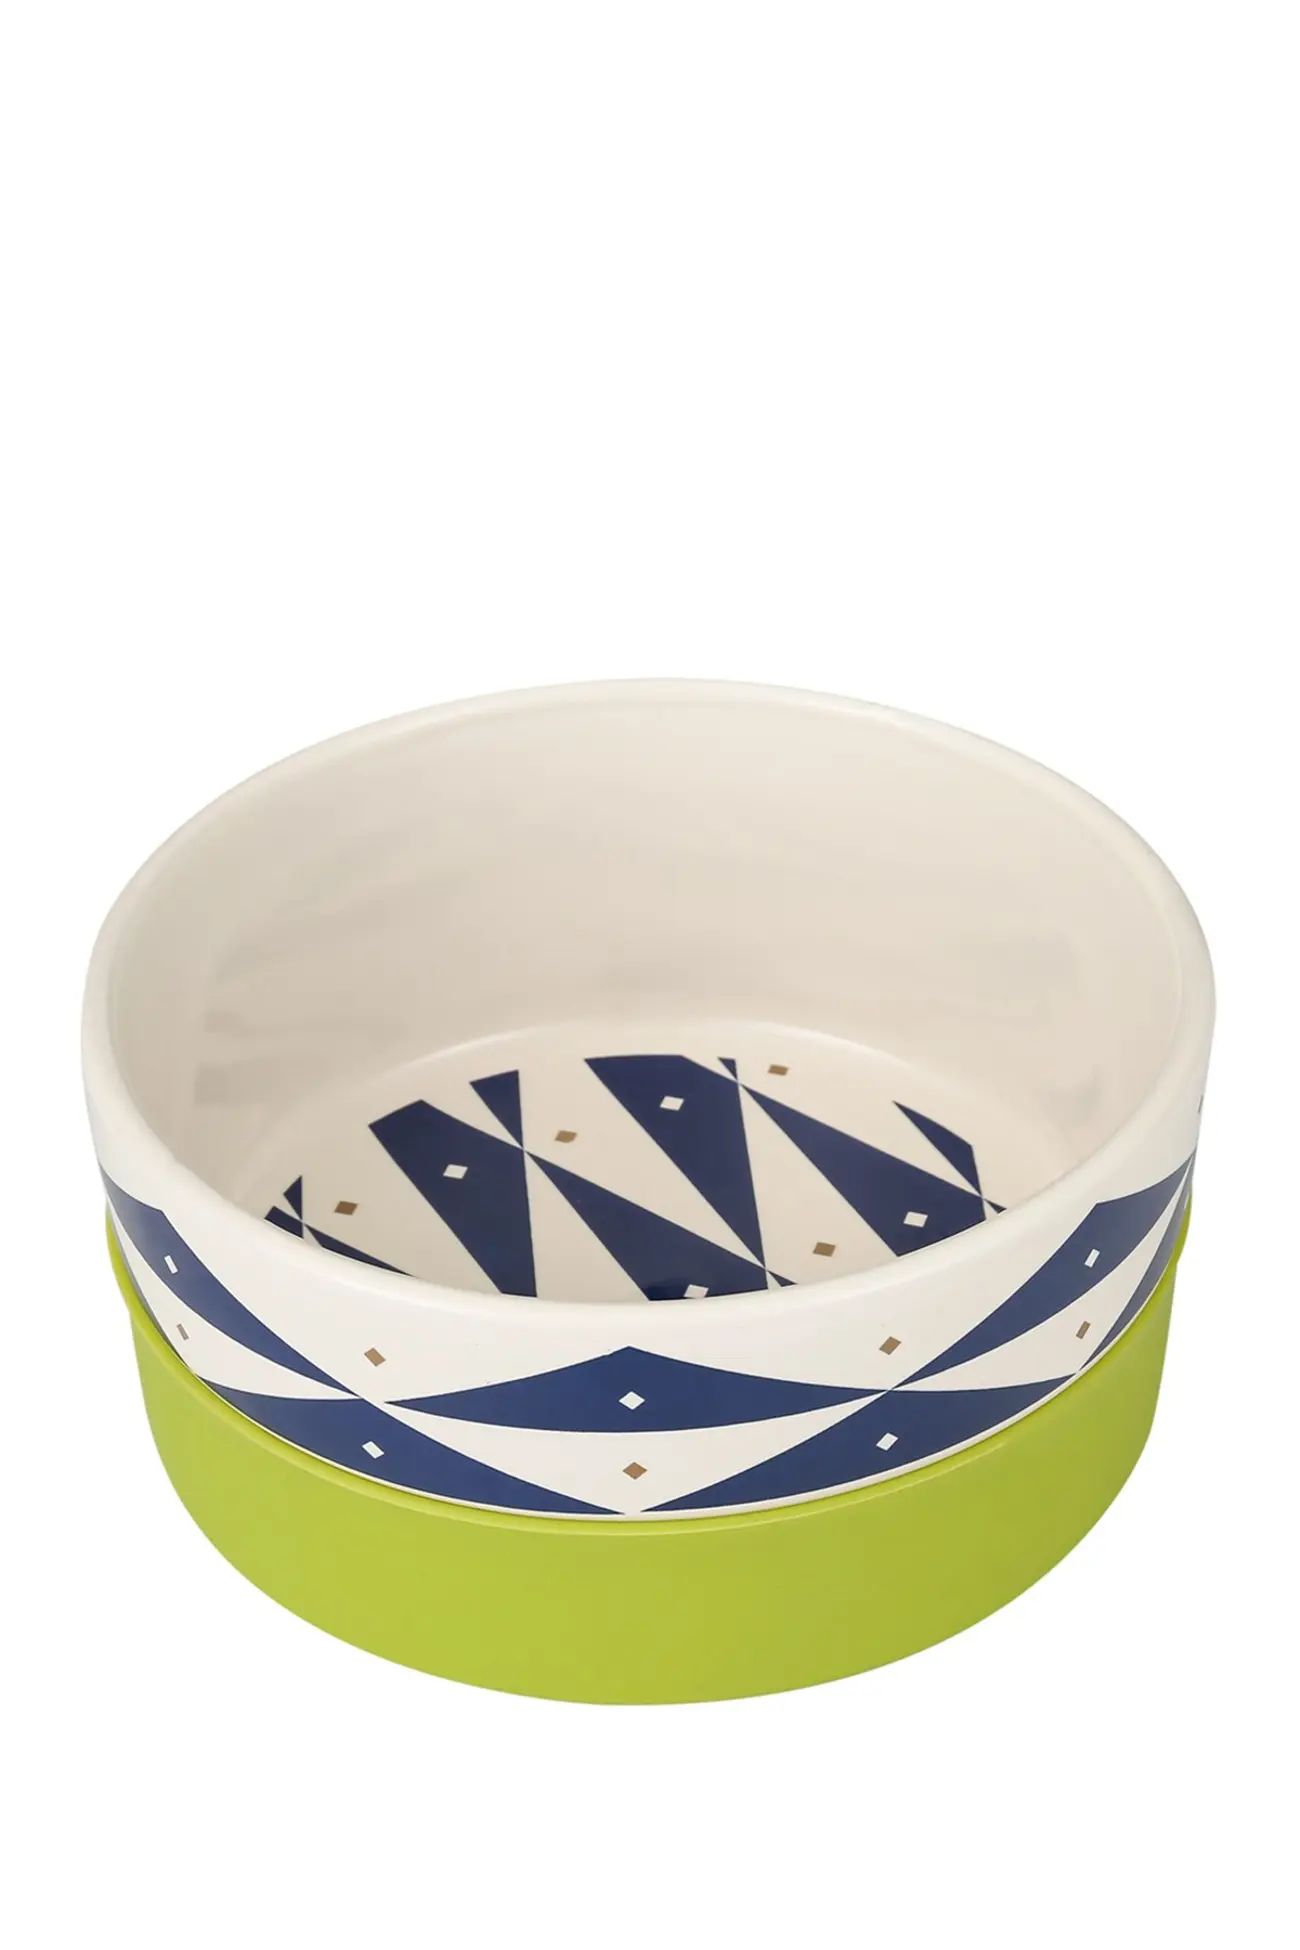 FETCH 4 PETS | Jonathan Adler: Now House "Oslo" Duo Dog Bowl - Small | Nordstrom Rack | Nordstrom Rack